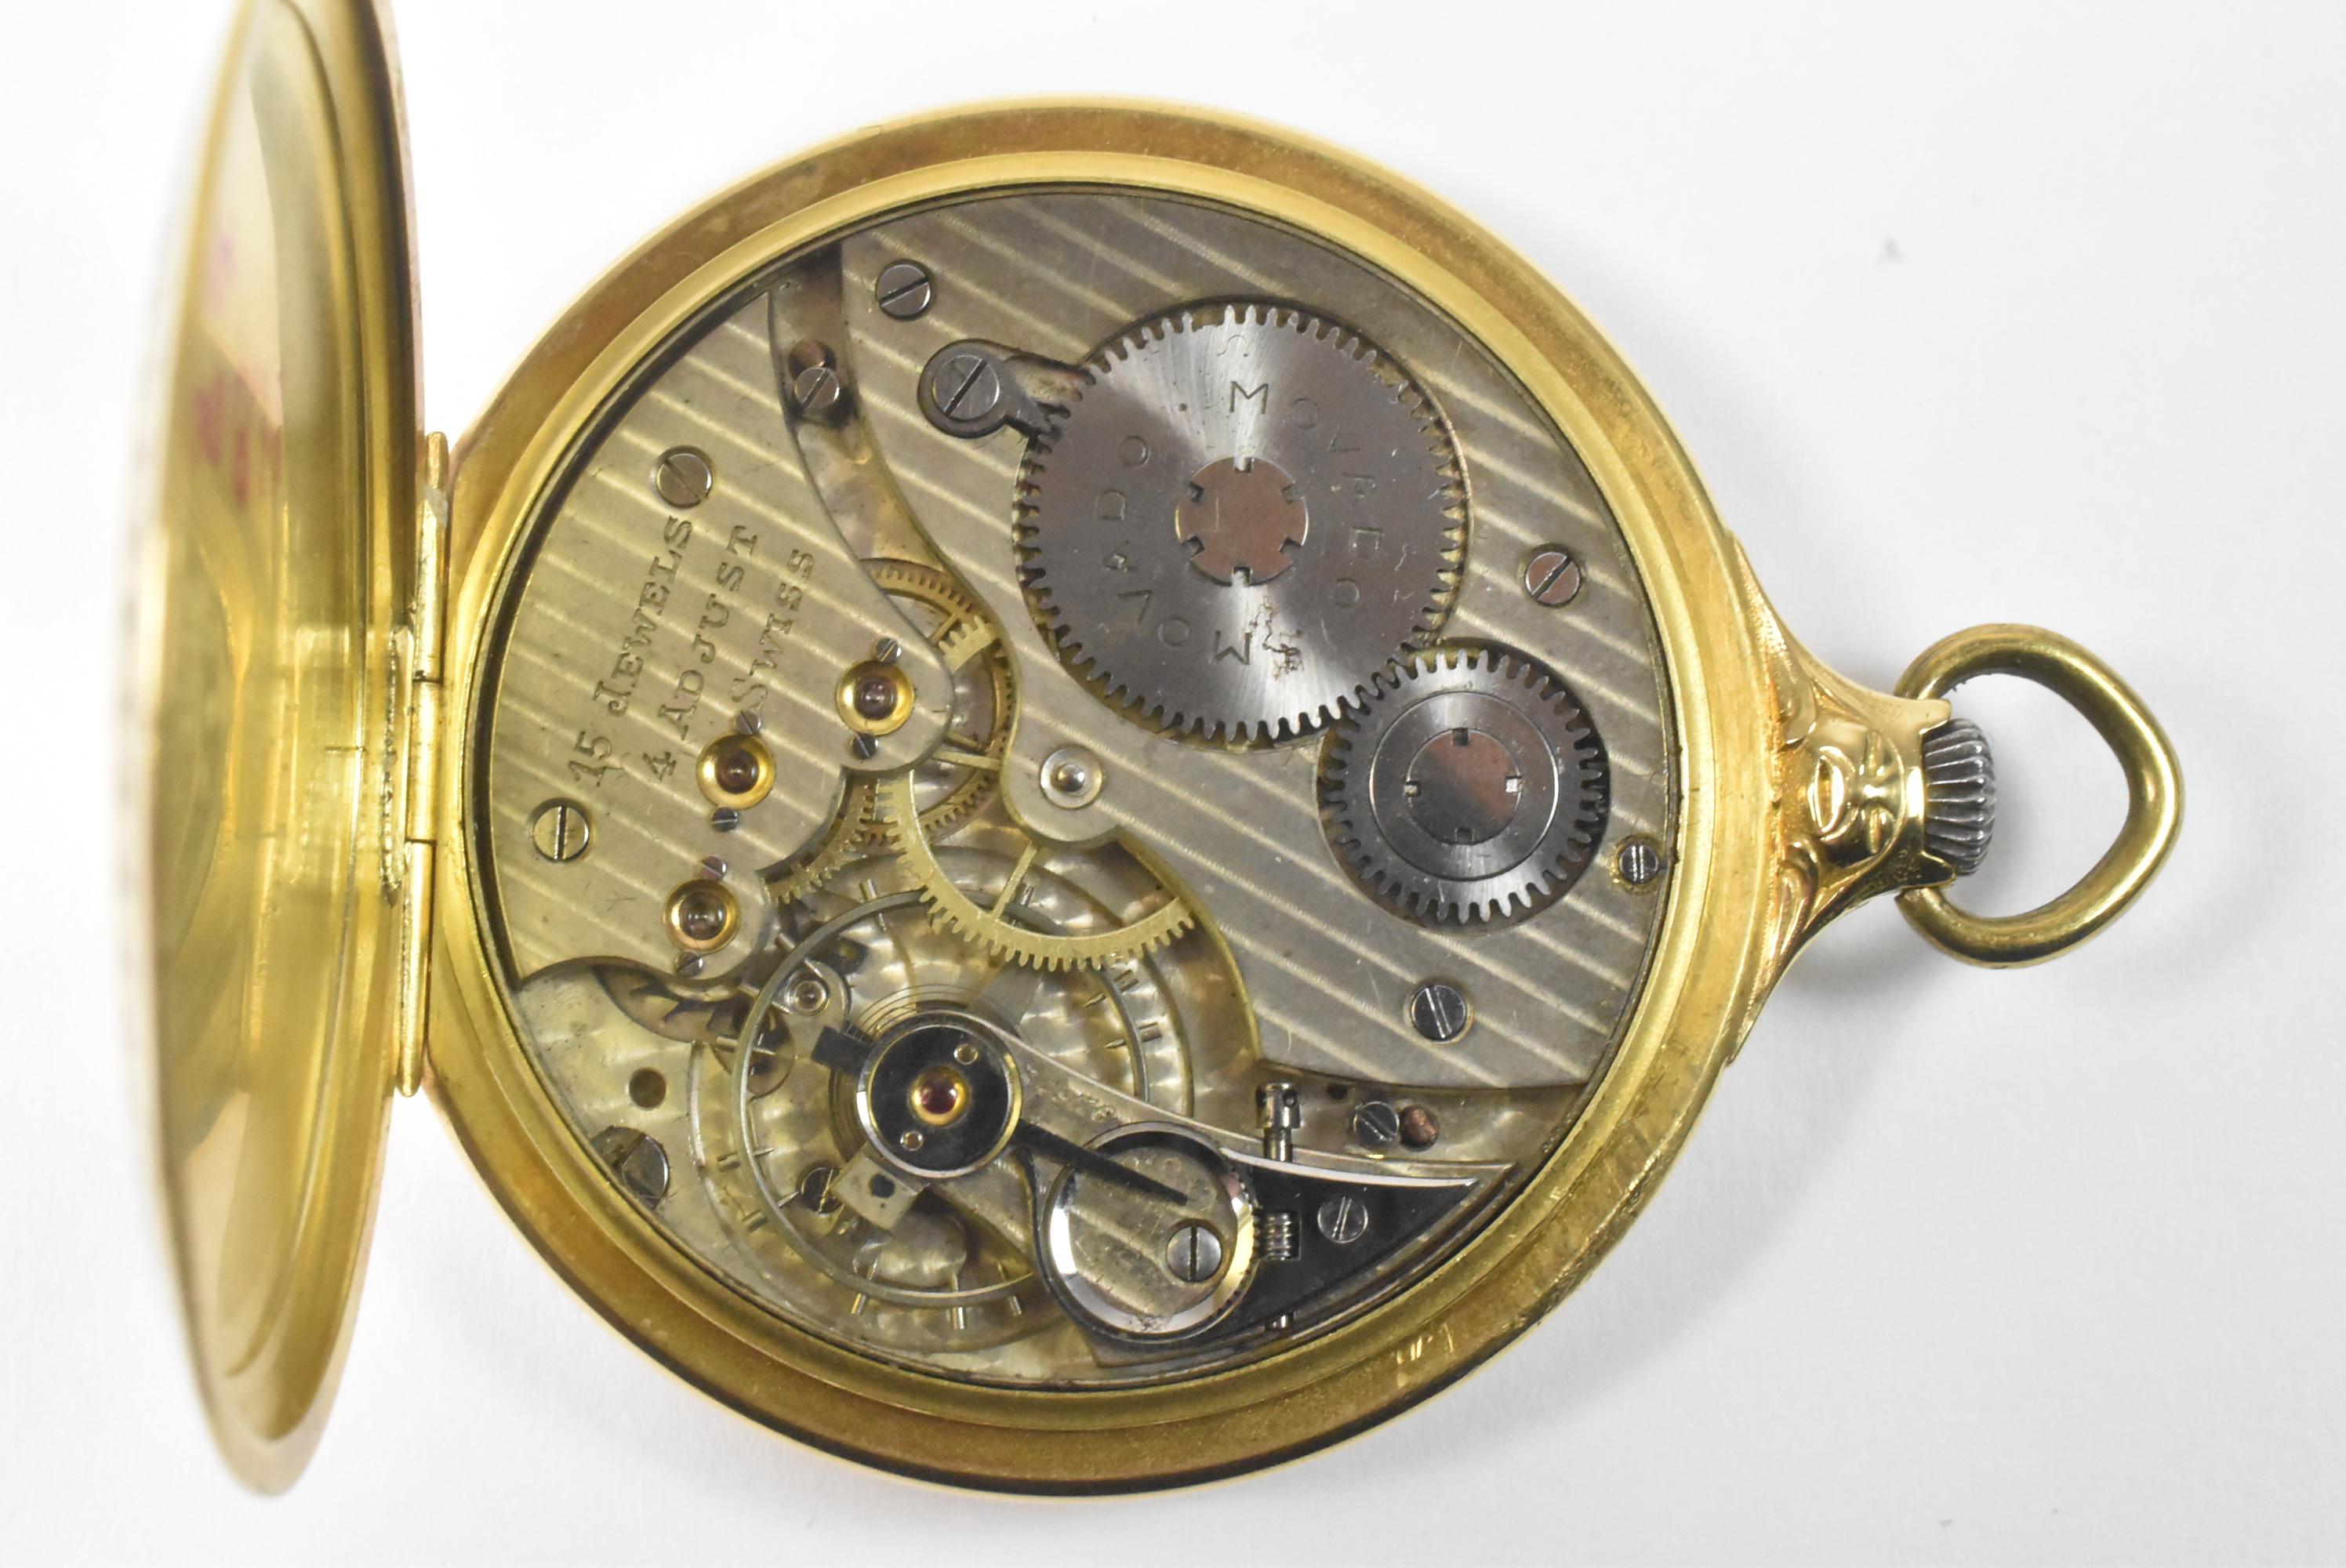 Movado of Enamel 18k Pocket Watch In Good Condition For Sale In Toledo, OH